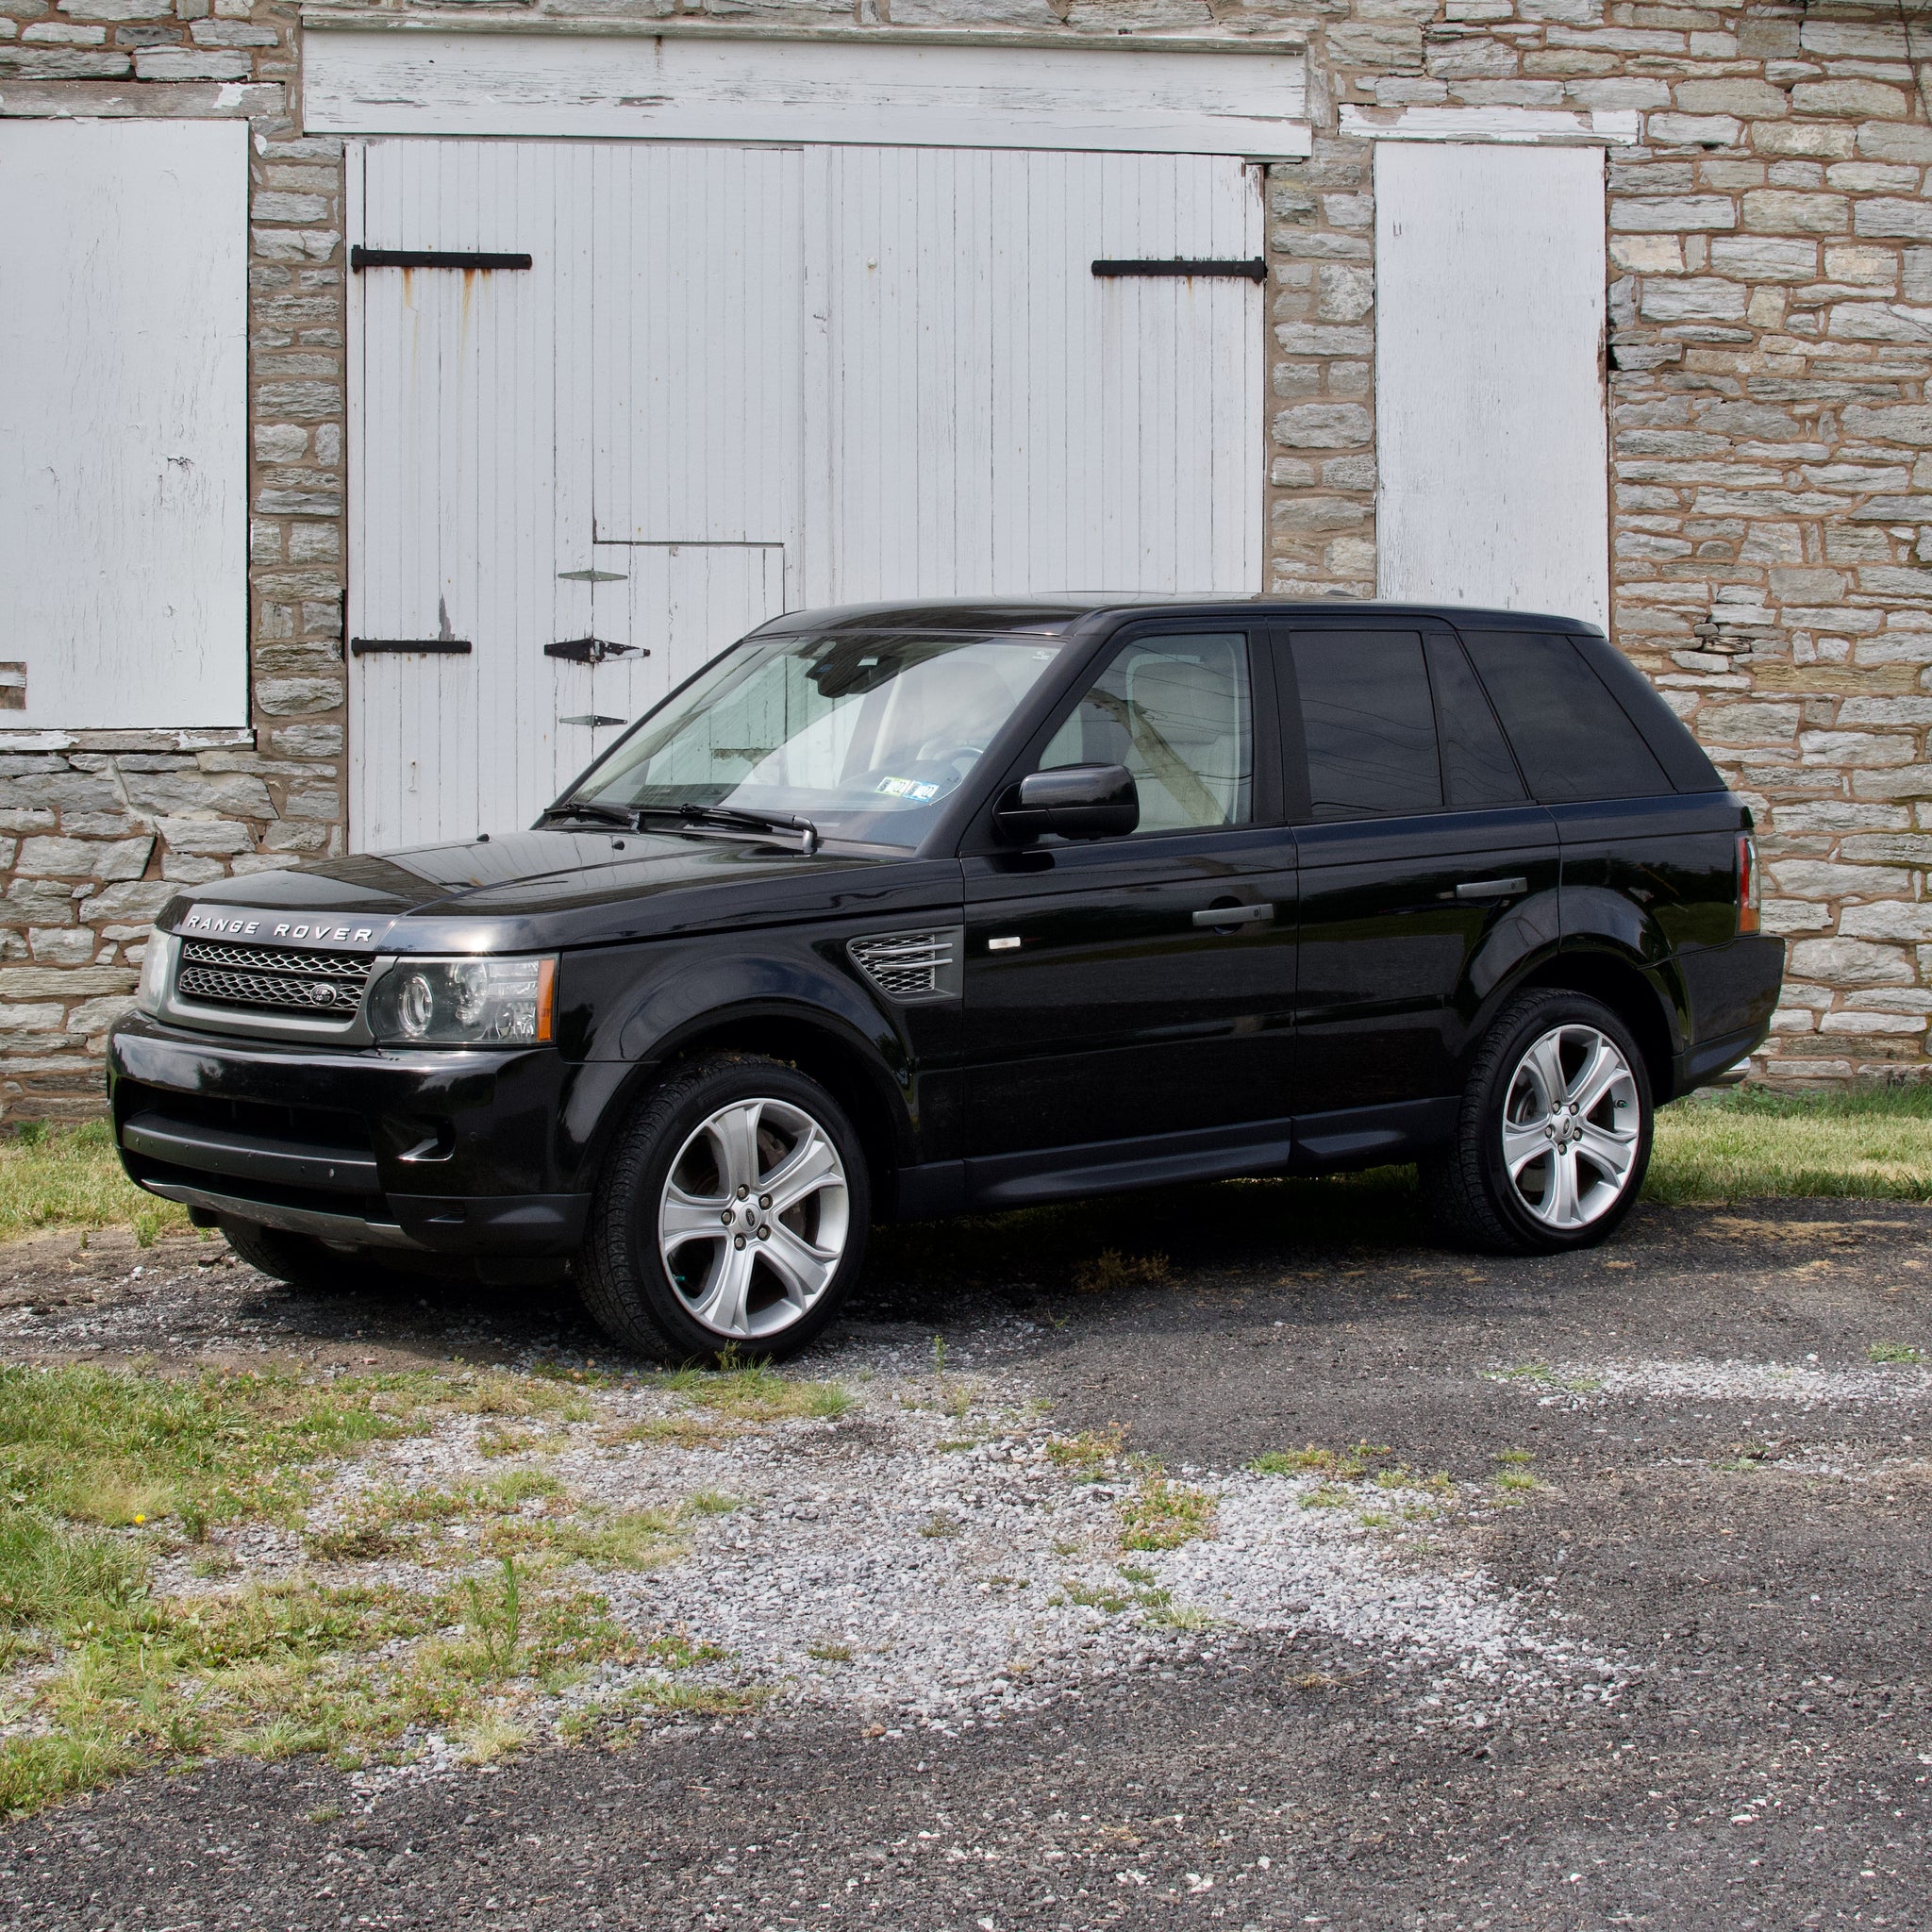 SOLD 2011 Range Rover Sport 5.0L Supercharged in Black with Ivory Interior